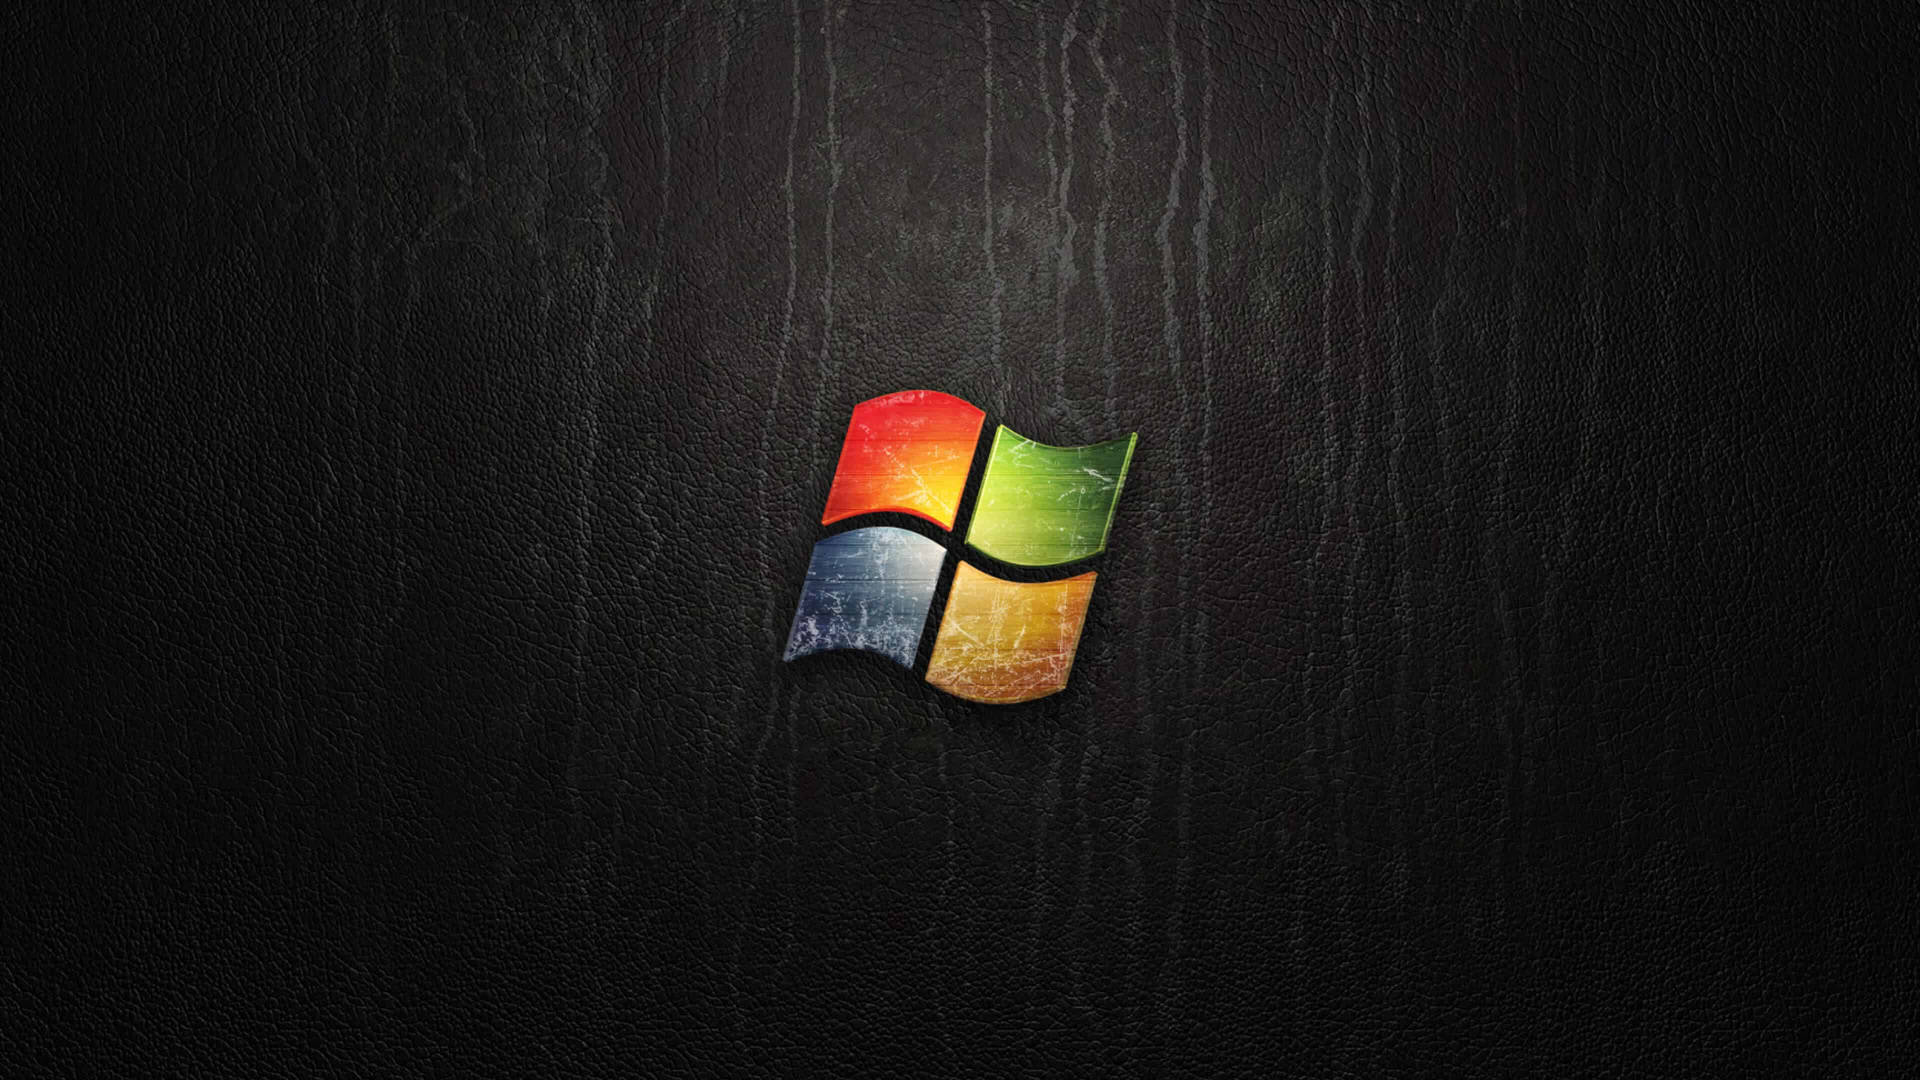 Microsoft 3840X2160 Wallpaper and Background Image